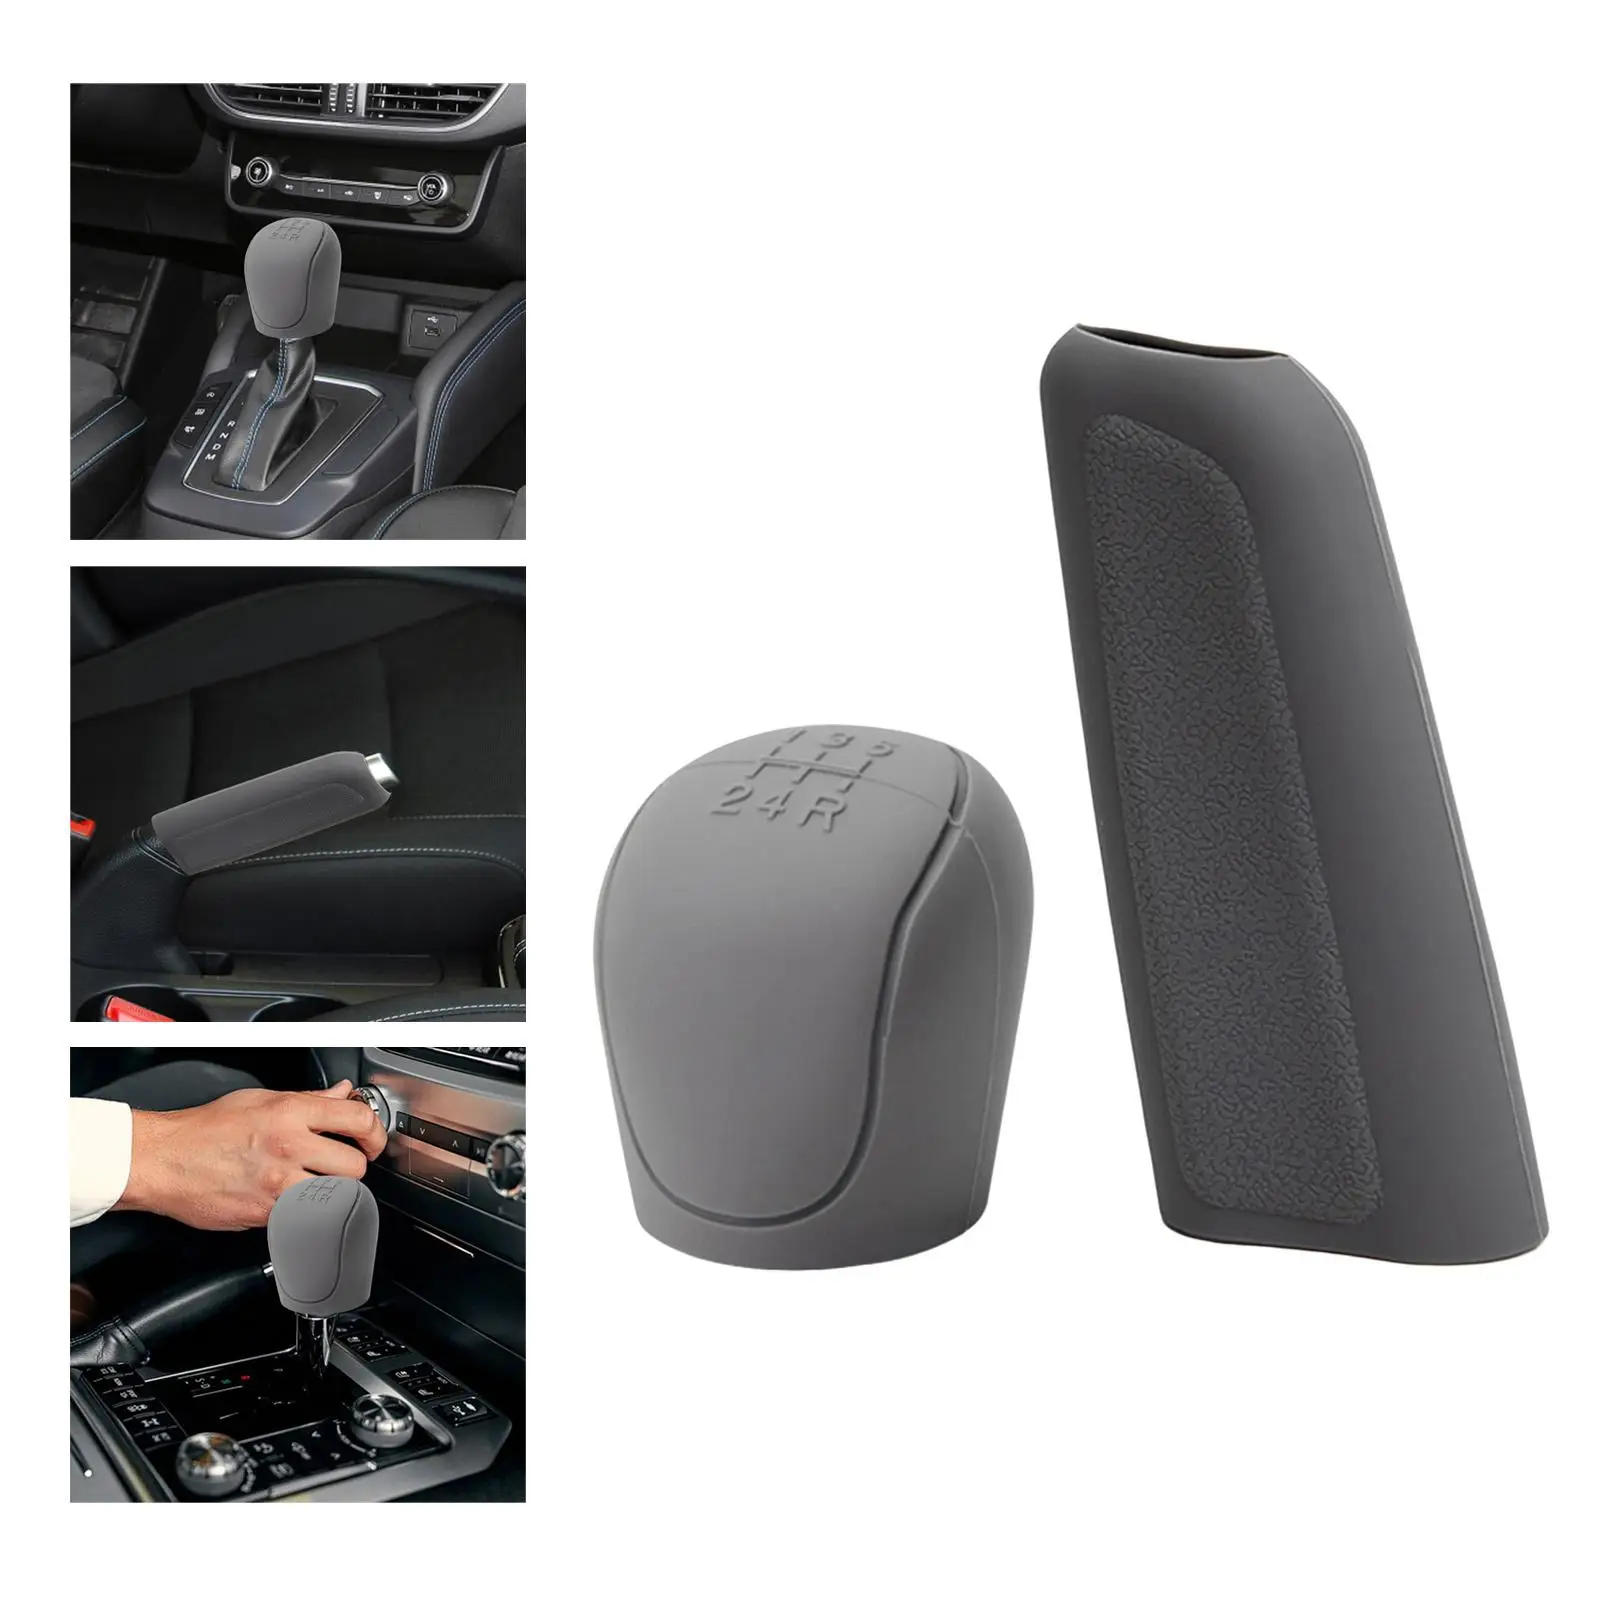 Automotive Gear Shift Cover Protector for Ford Focus Escort Transit Replace Parts